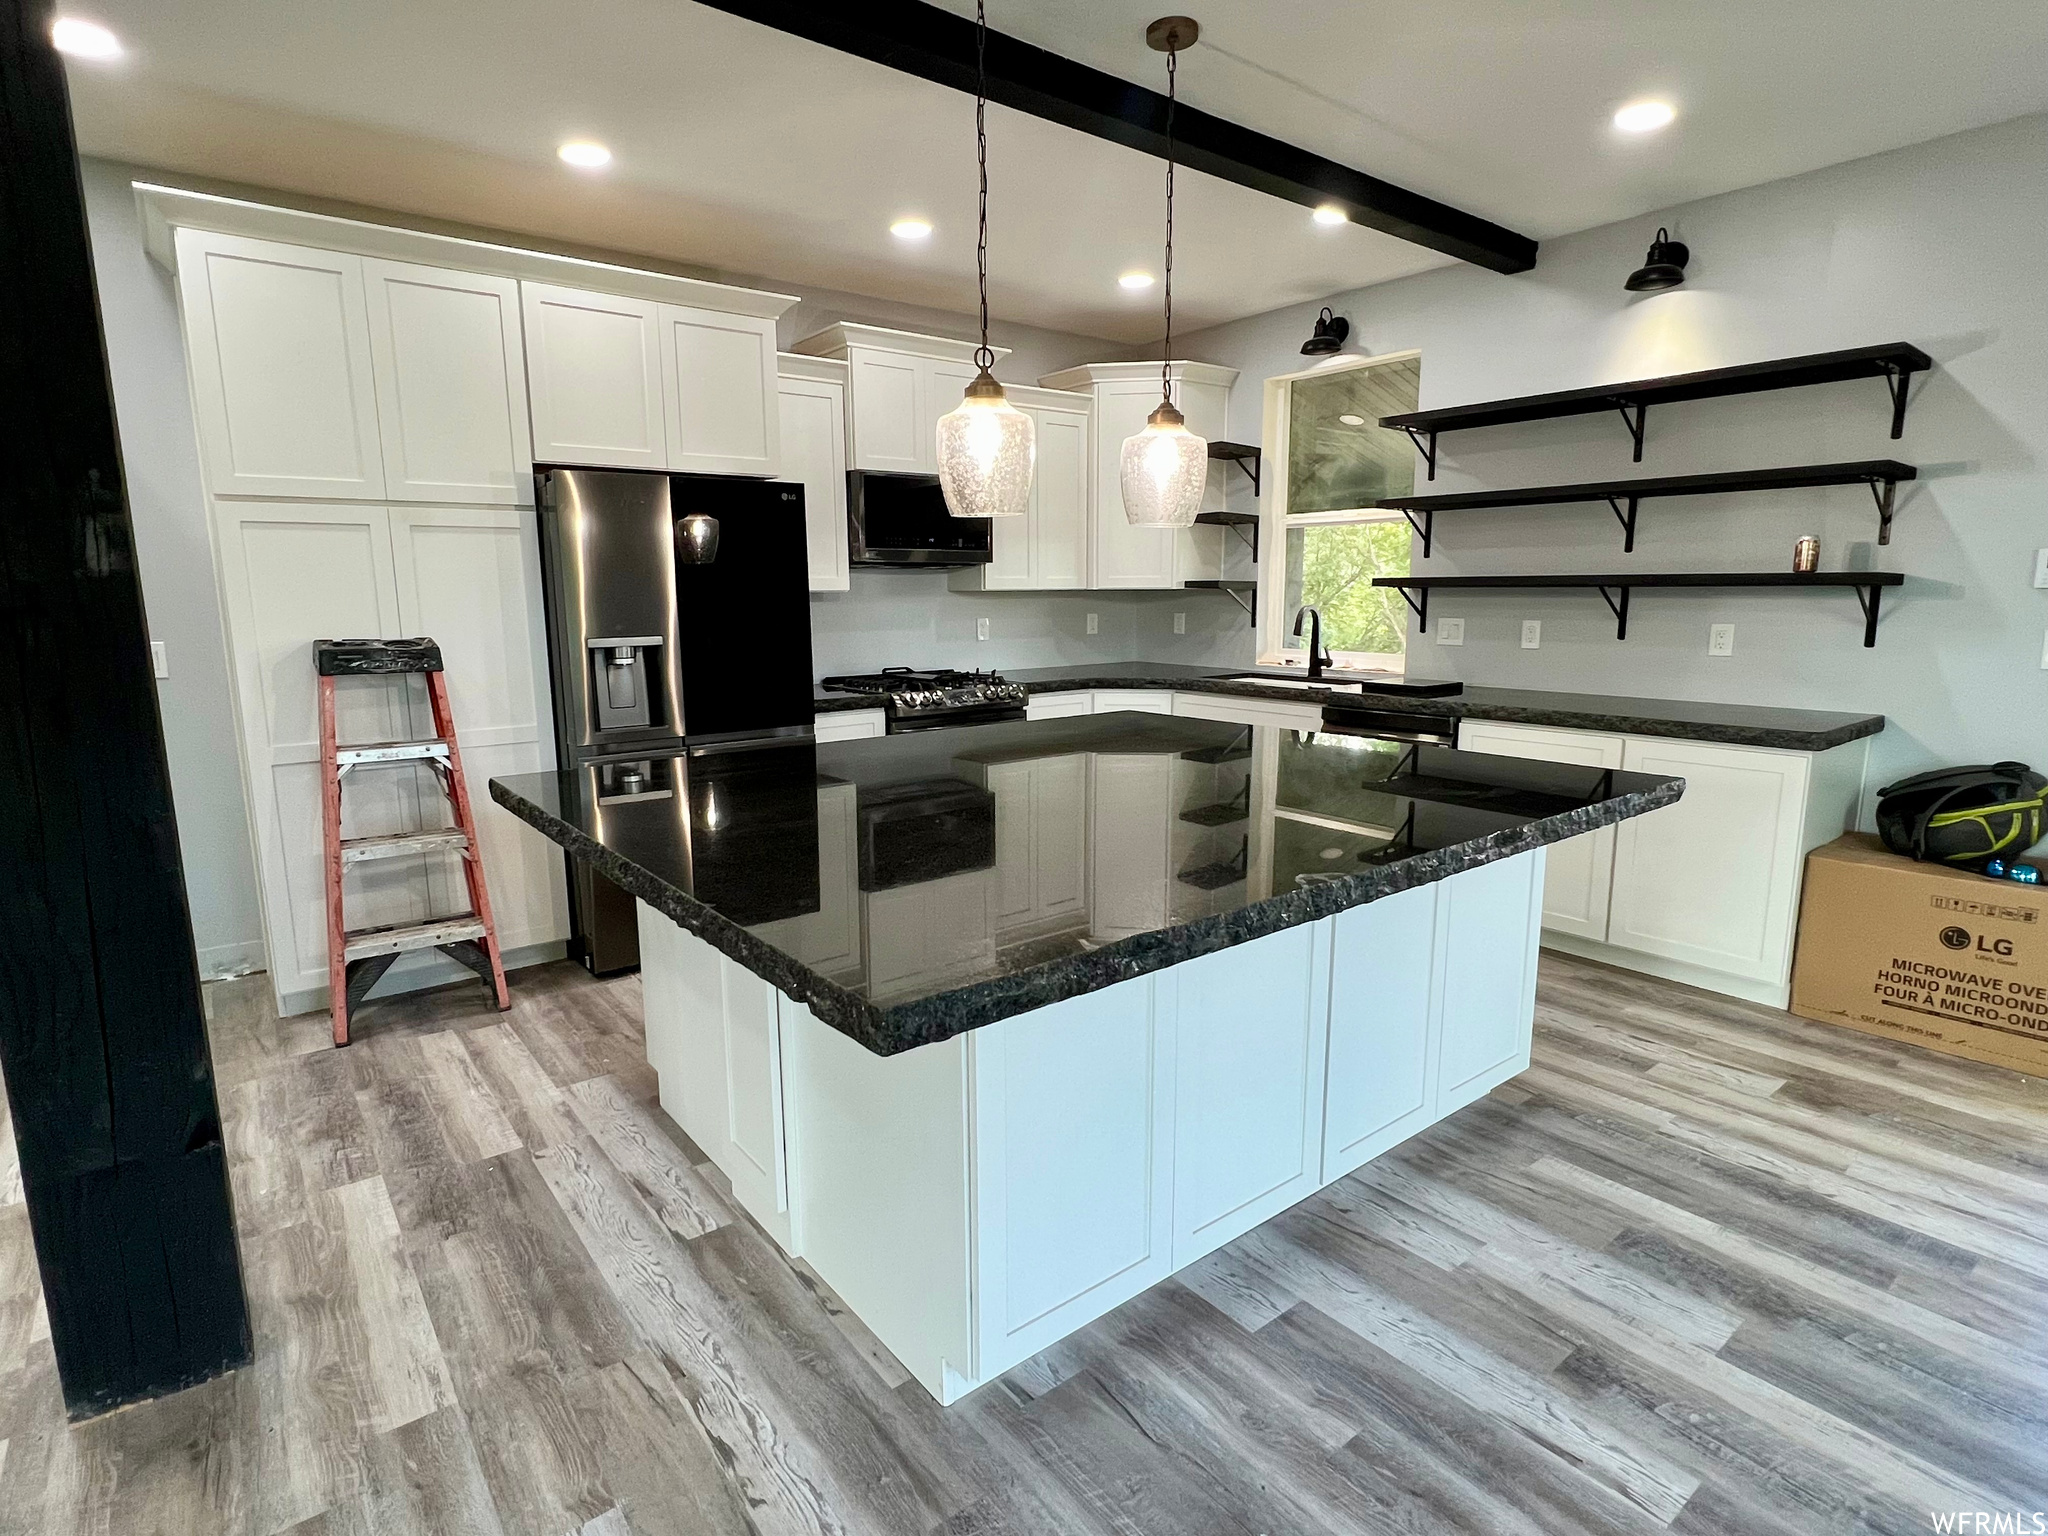 Kitchen with a center island, hardwood floors, dark stone countertops, white cabinets, and pendant lighting